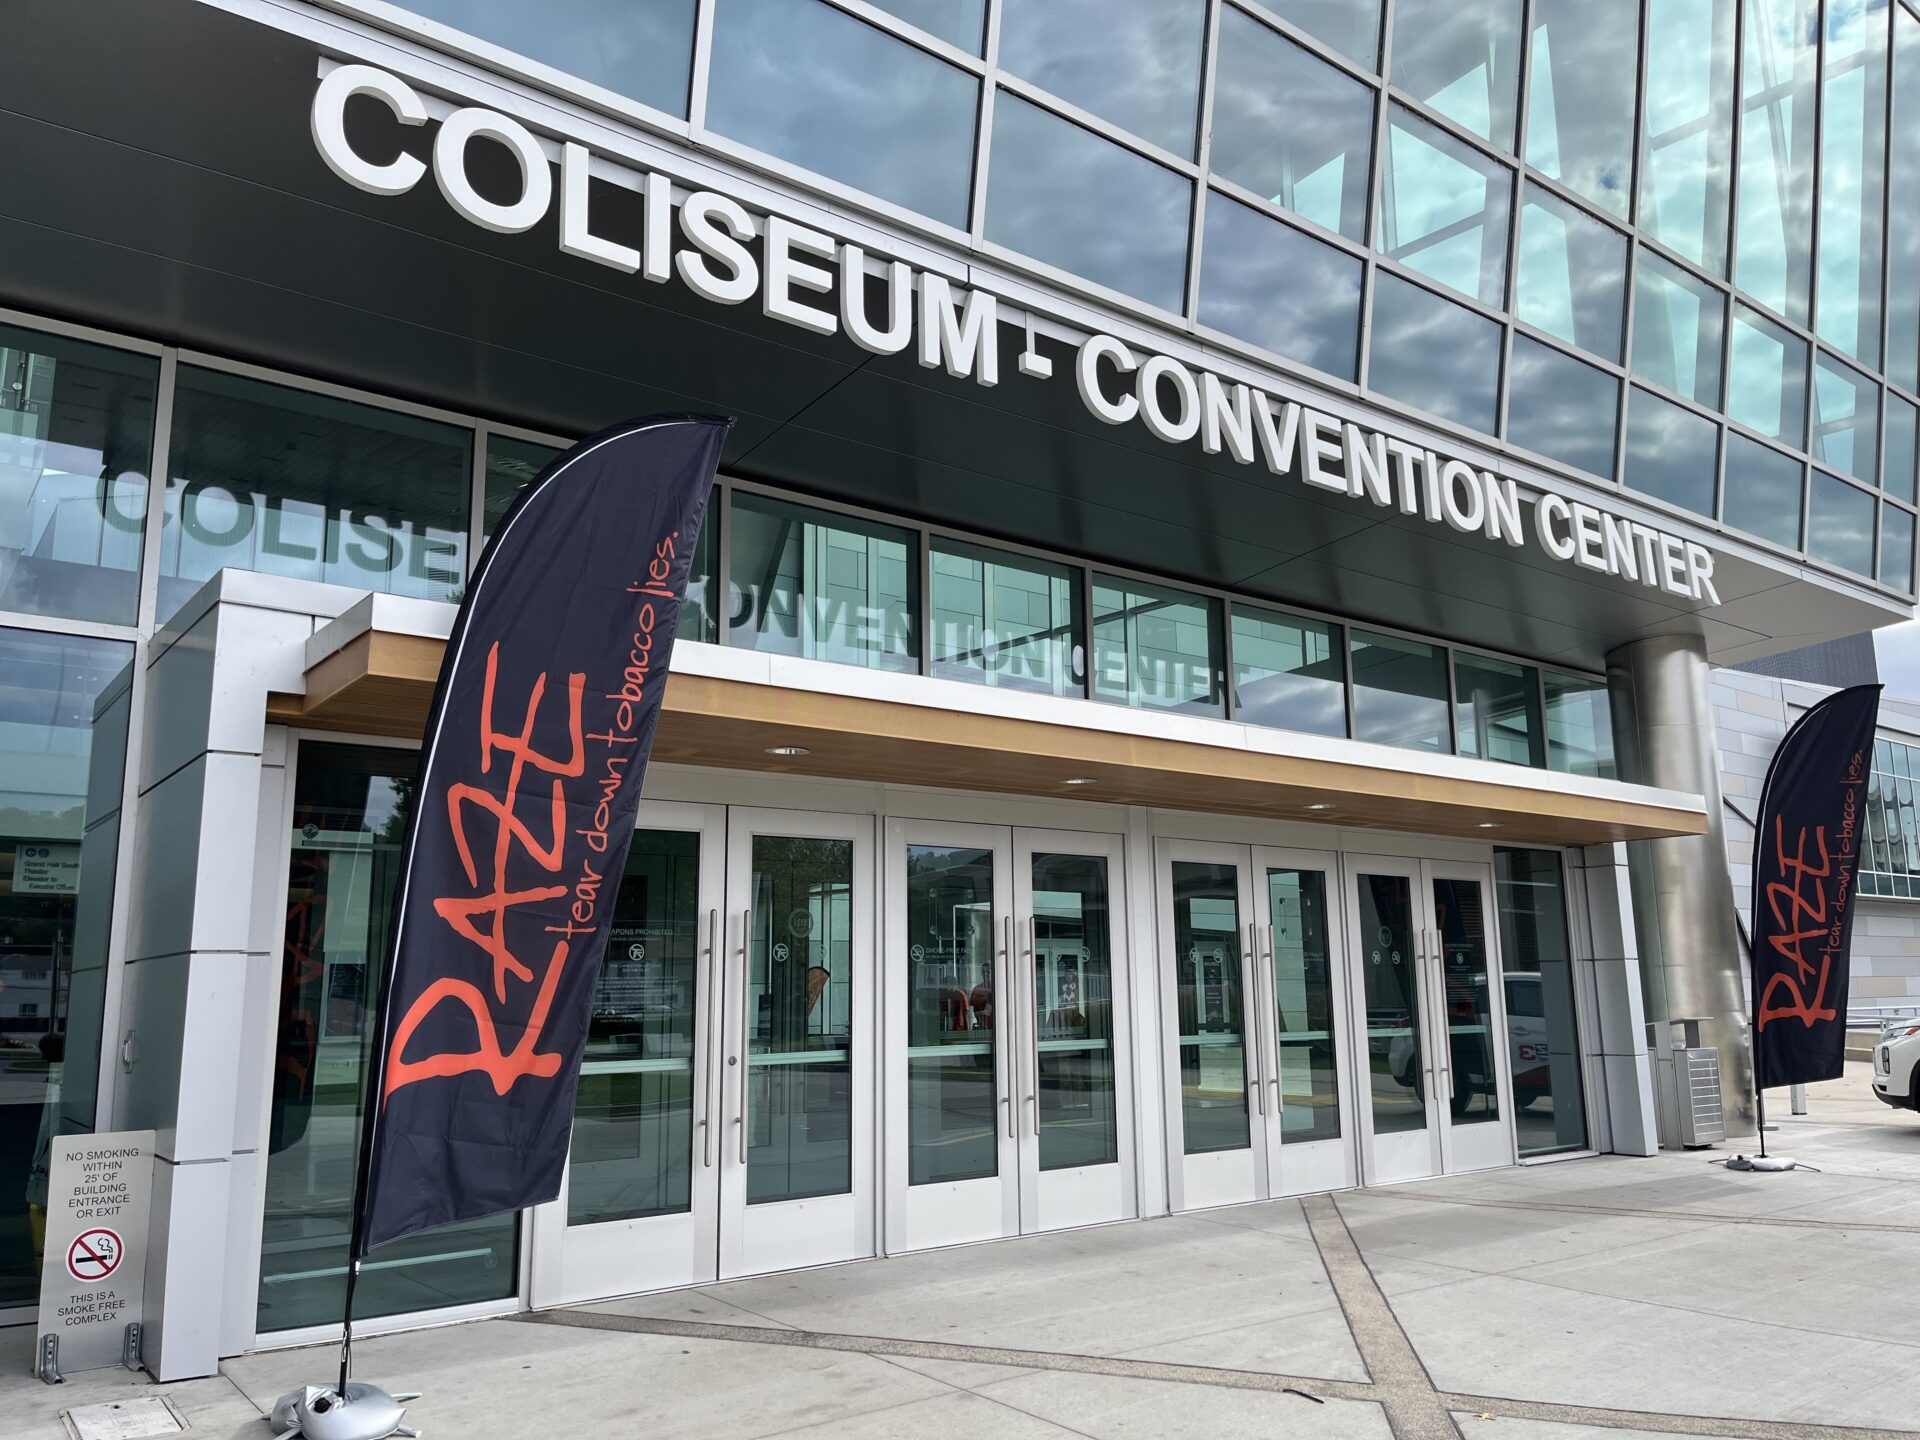 The Charleston Coliseum and Convention Center's front doors are adorned with RAZE signage: orange text with black background.